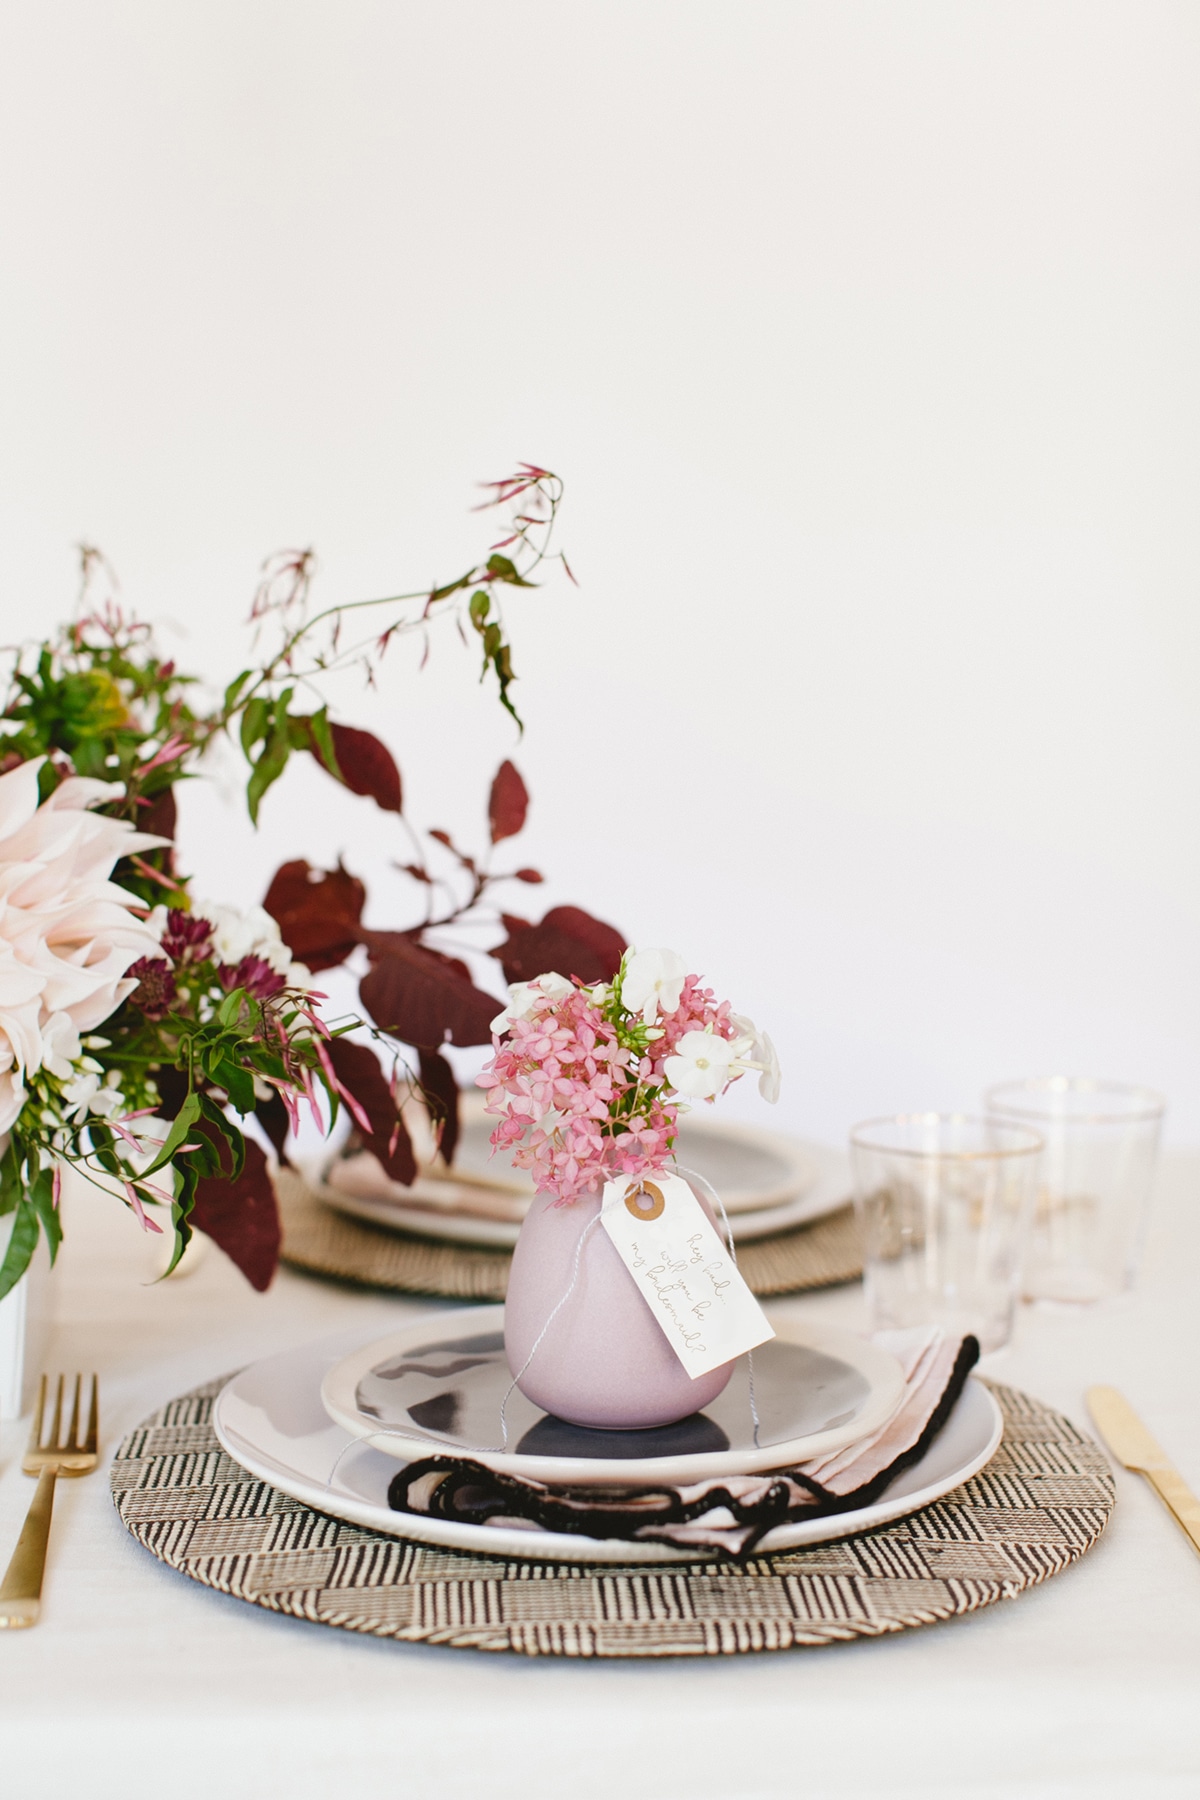 setting the table for a simple bridesmaids brunch | coco kelley wedding